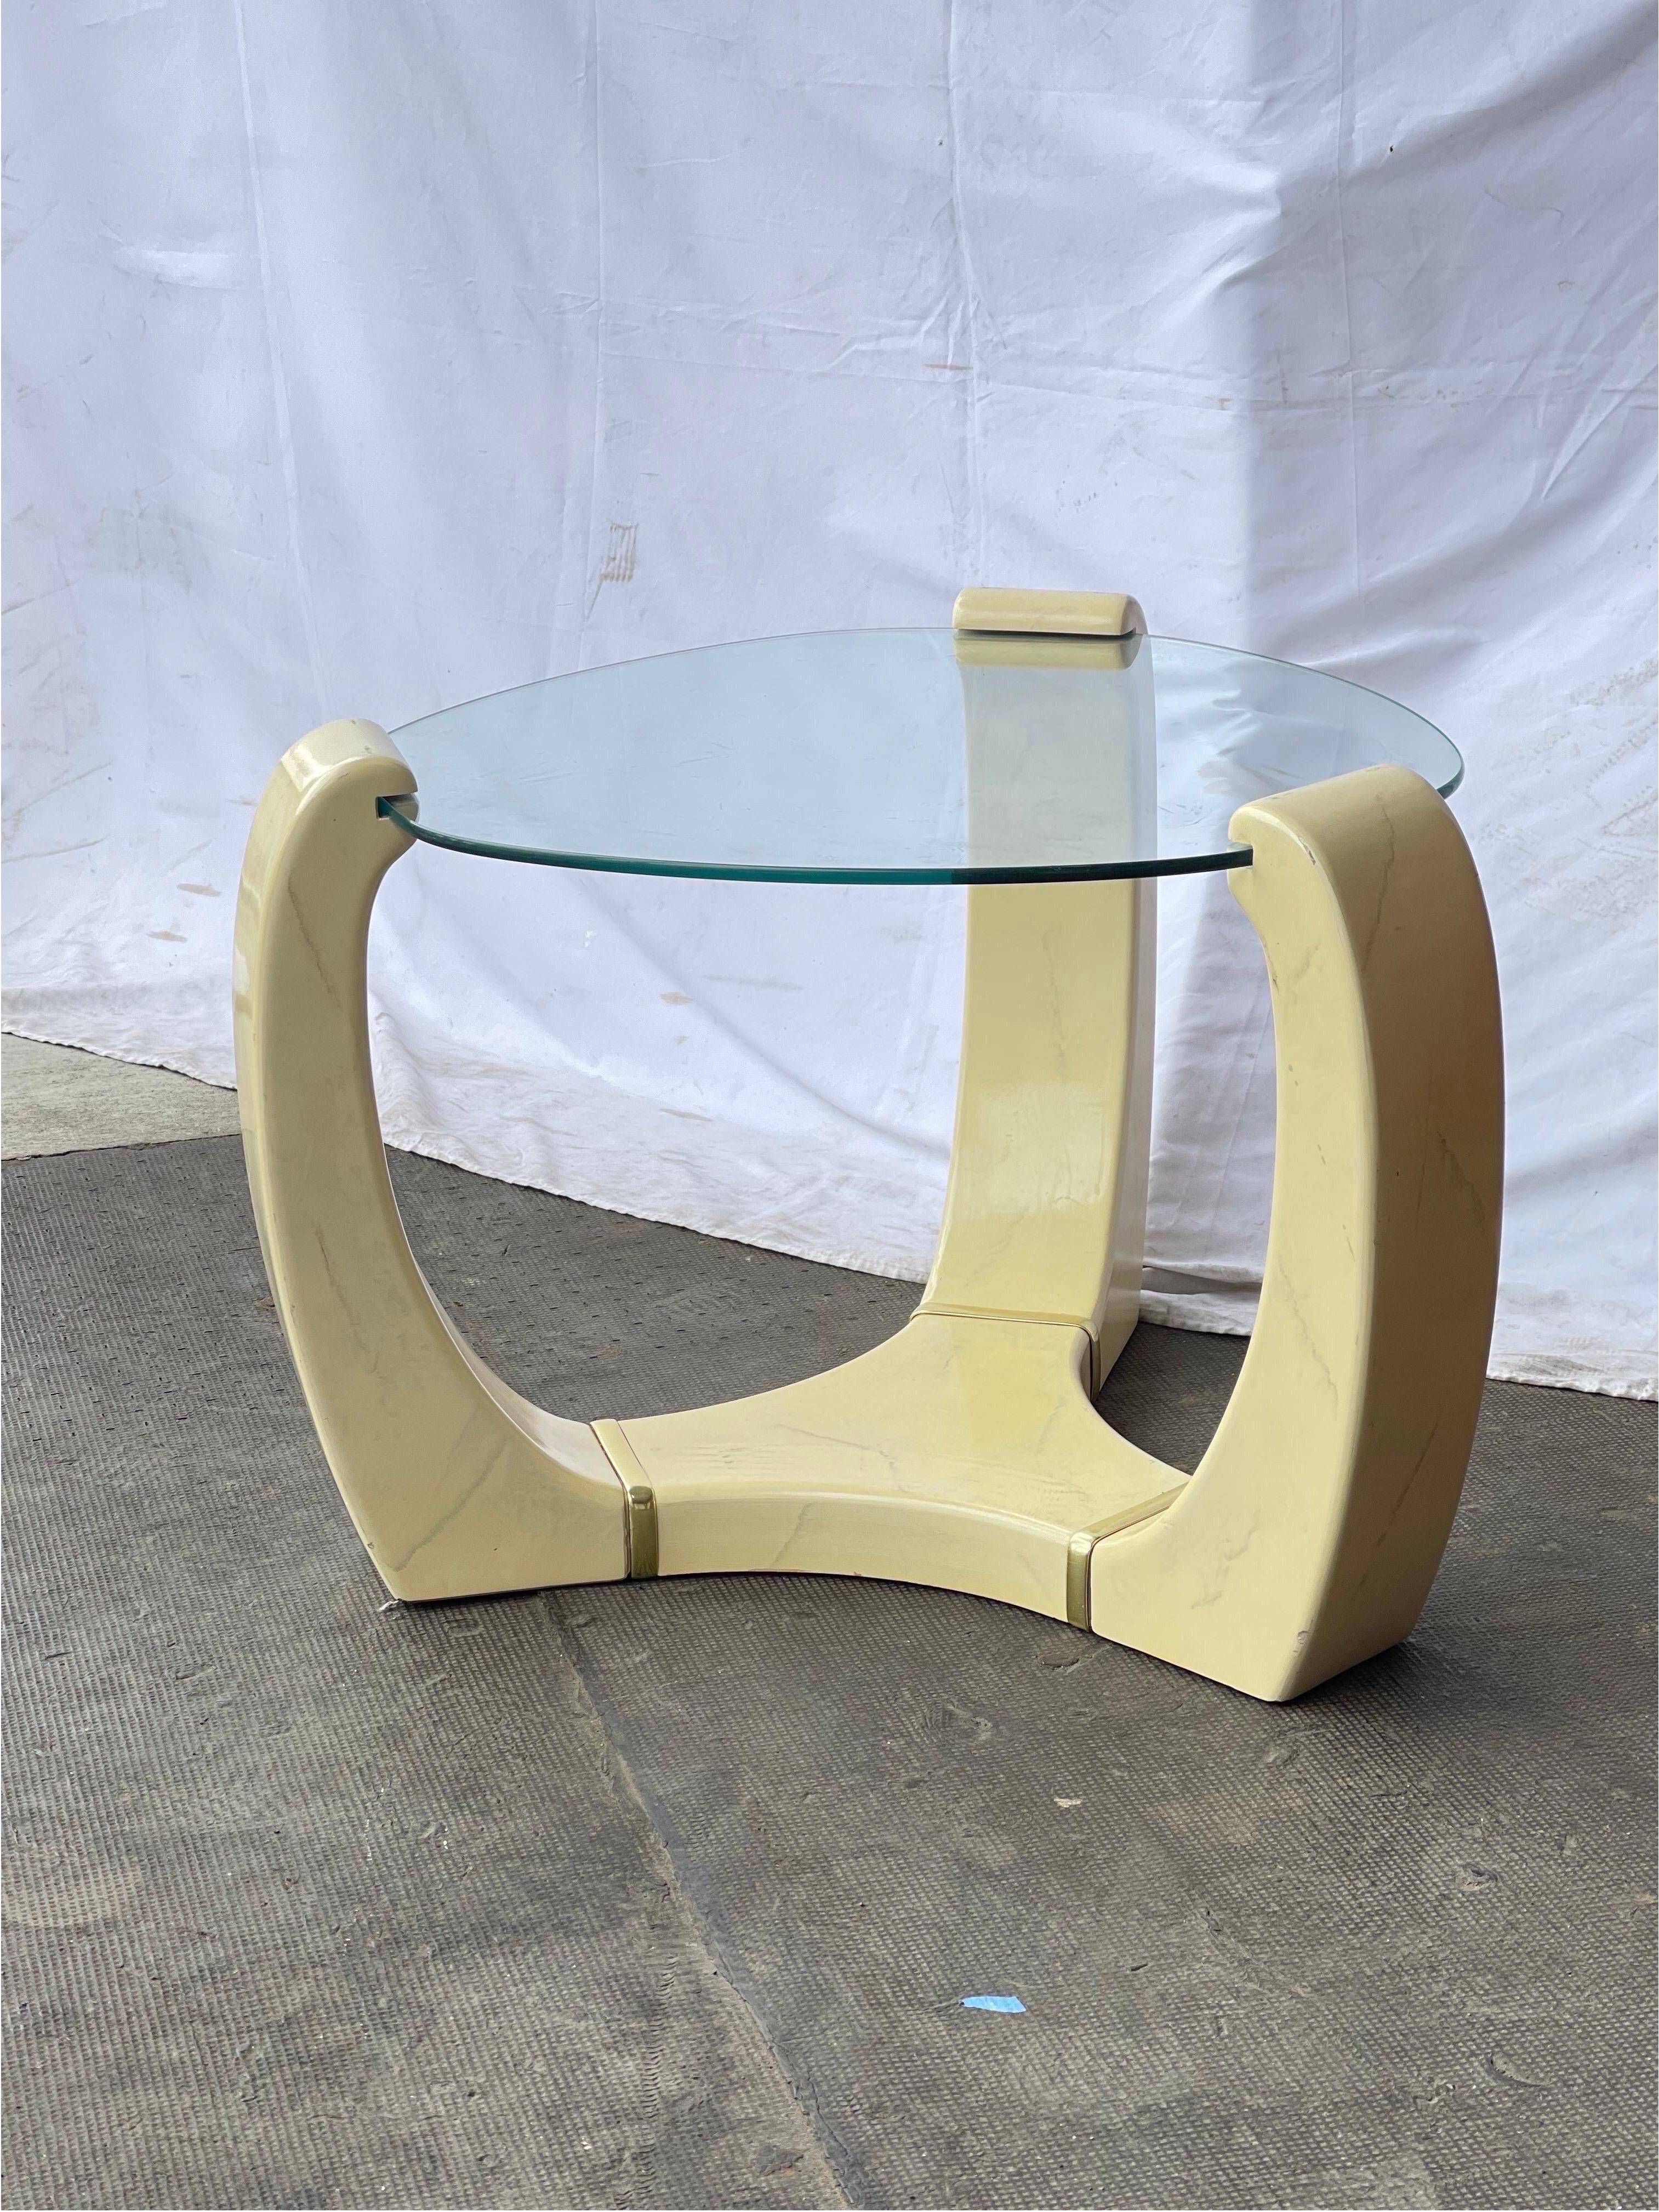 Vintage Modern Glass Table

Dimensions. 29 W ; 27 D ; 21 H